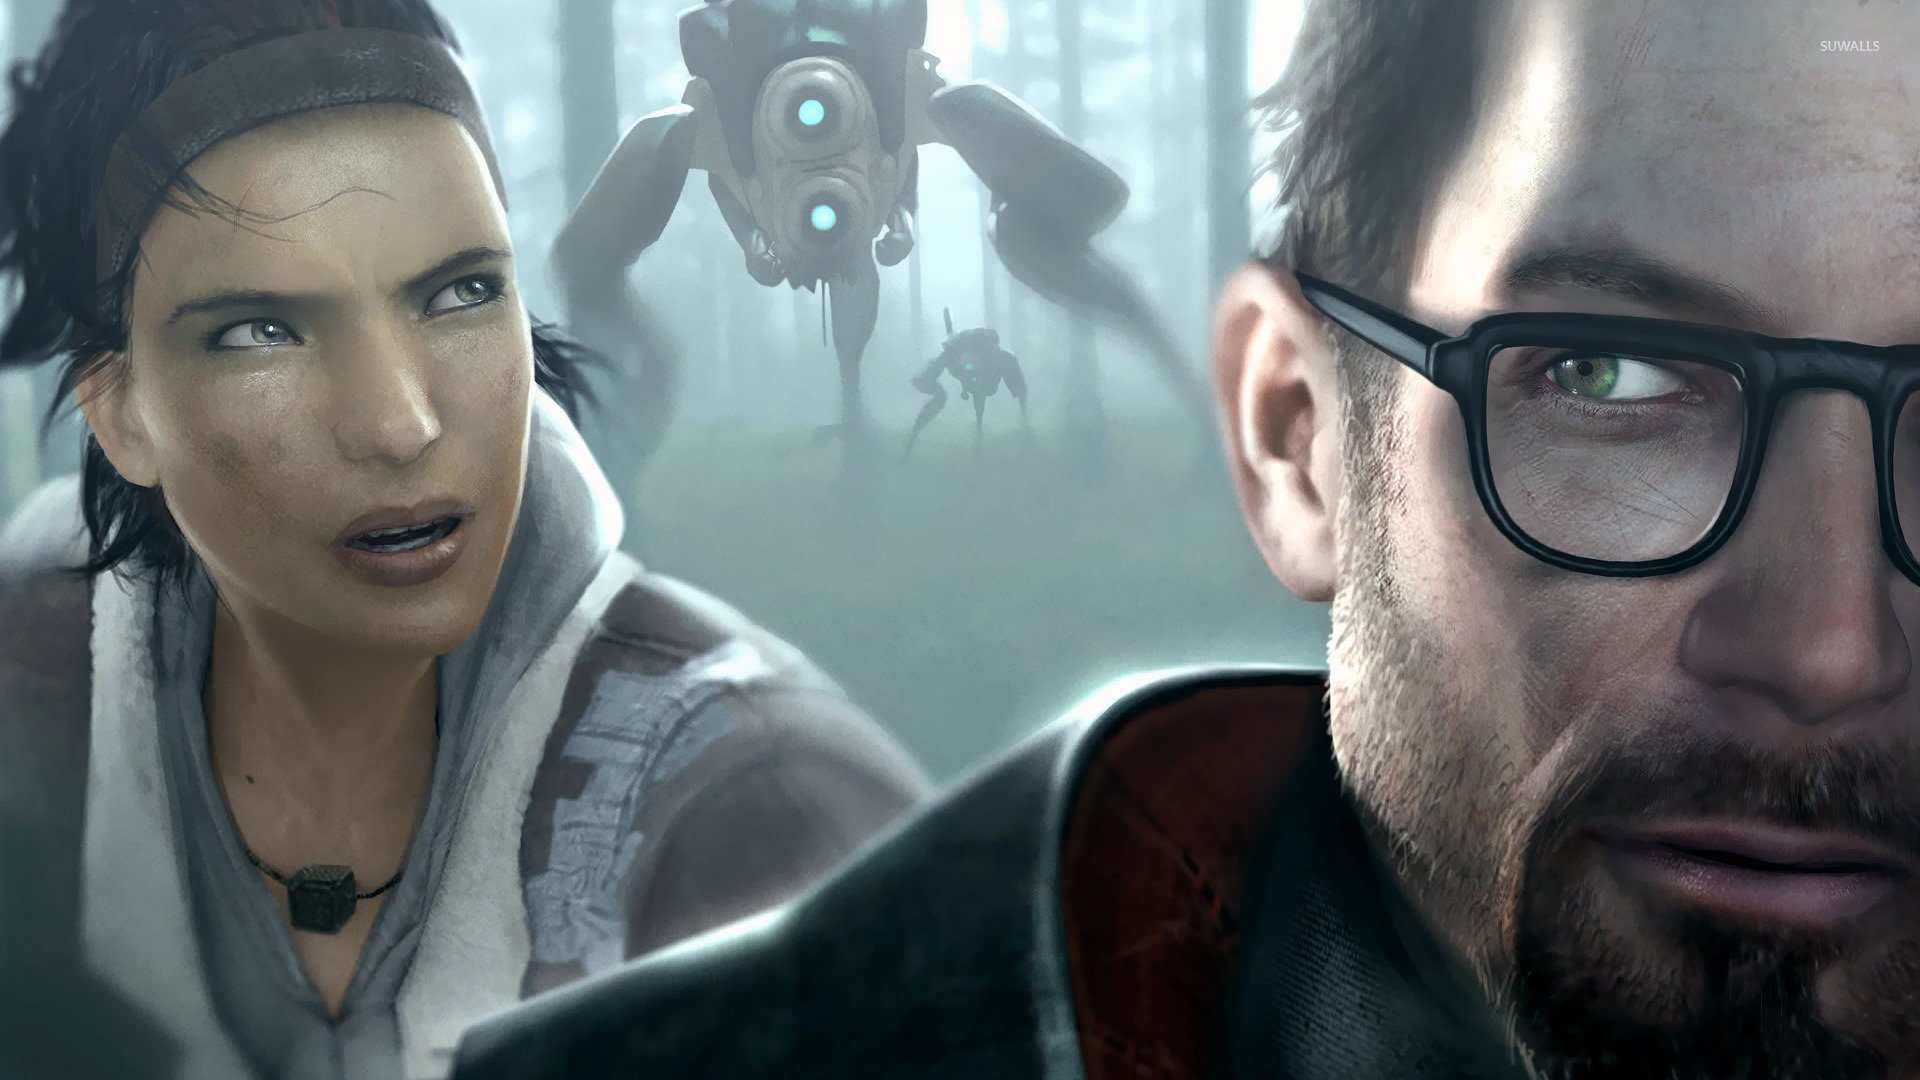 No VR? No worries. Half-Life: Alyx is now playable with a mouse